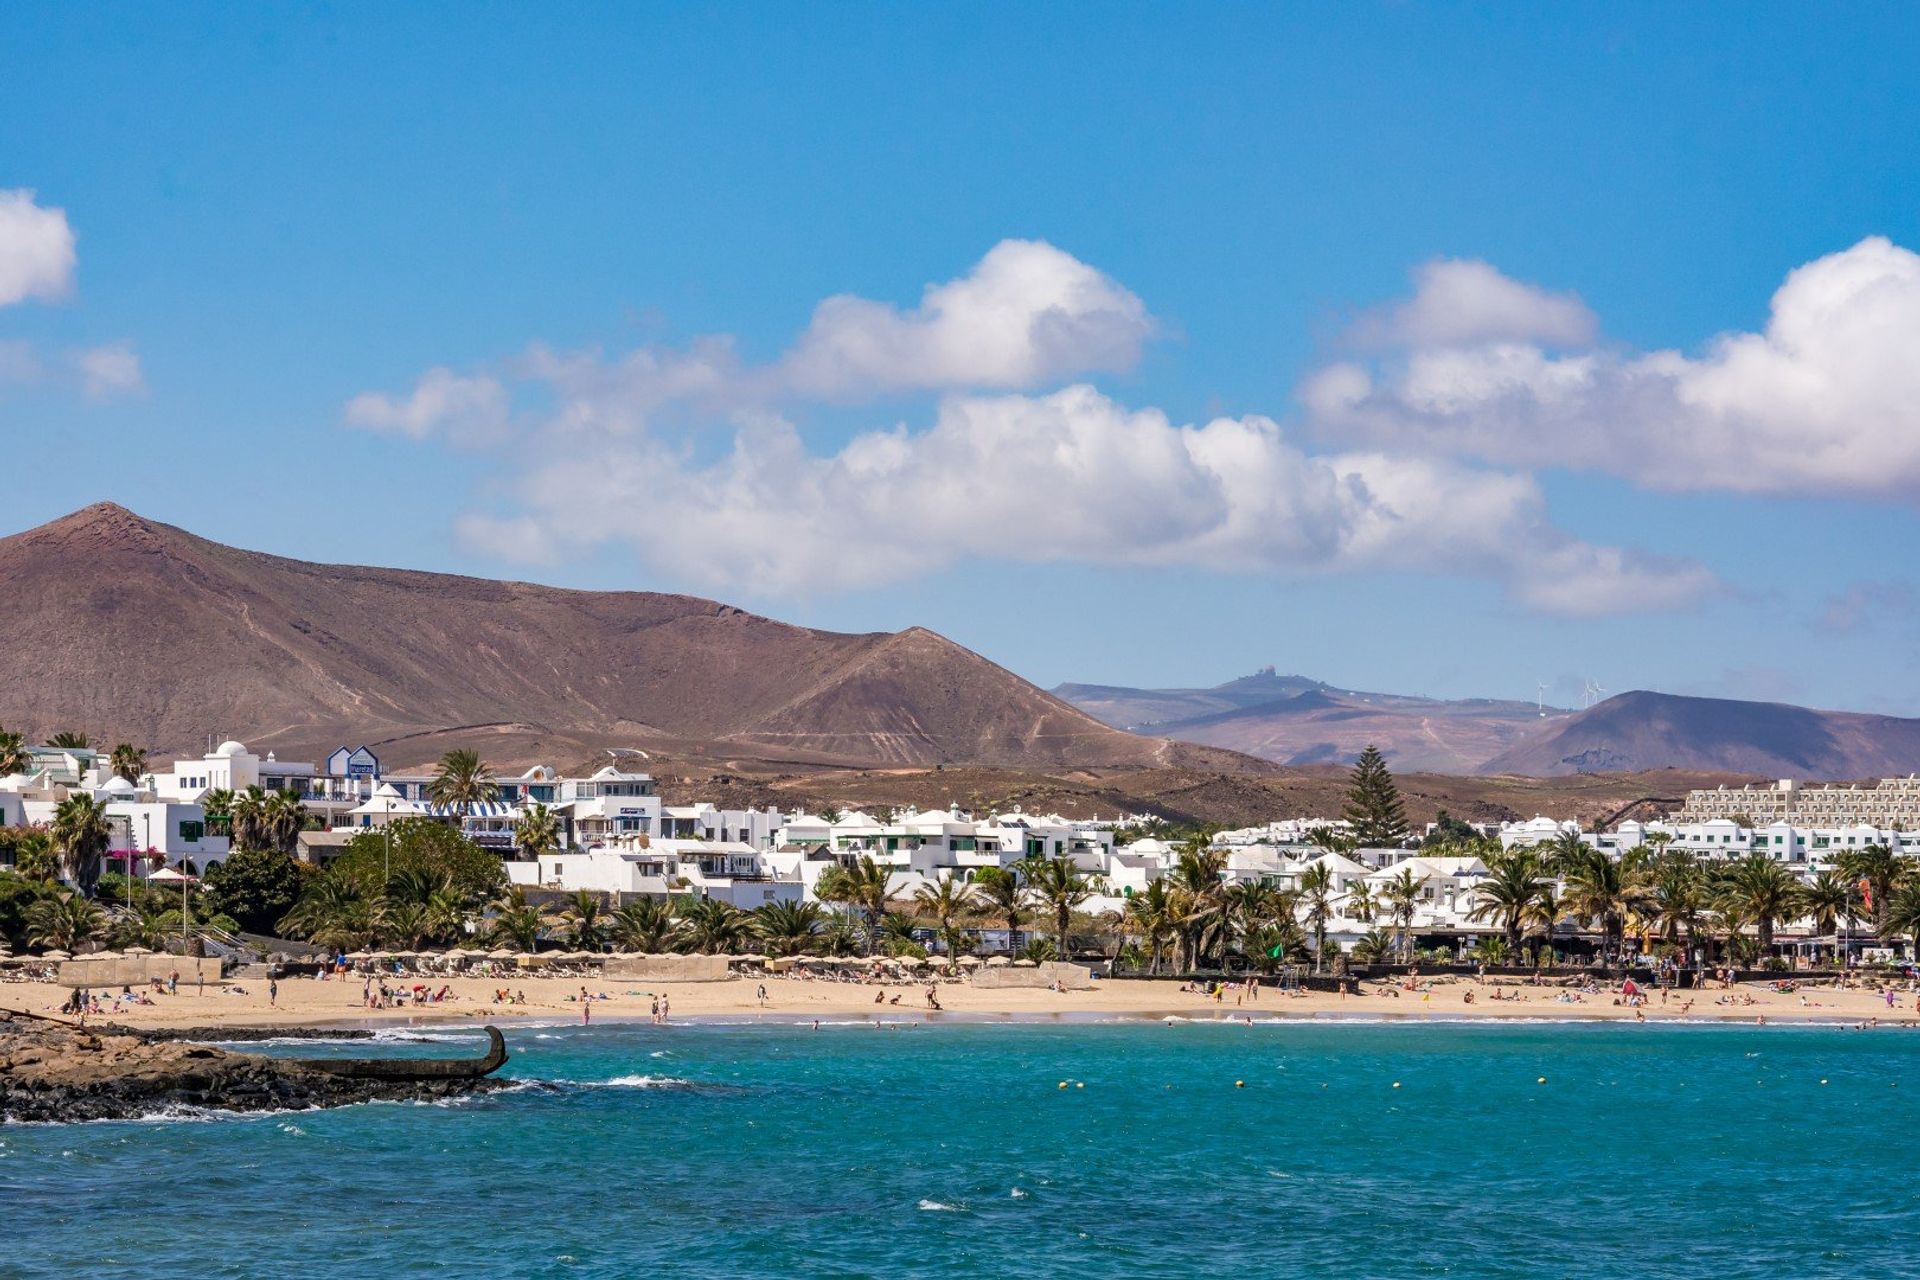 Visit the sunny Costa Teguise and enjoy a peaceful and relaxing break on Lanzarote's east coast